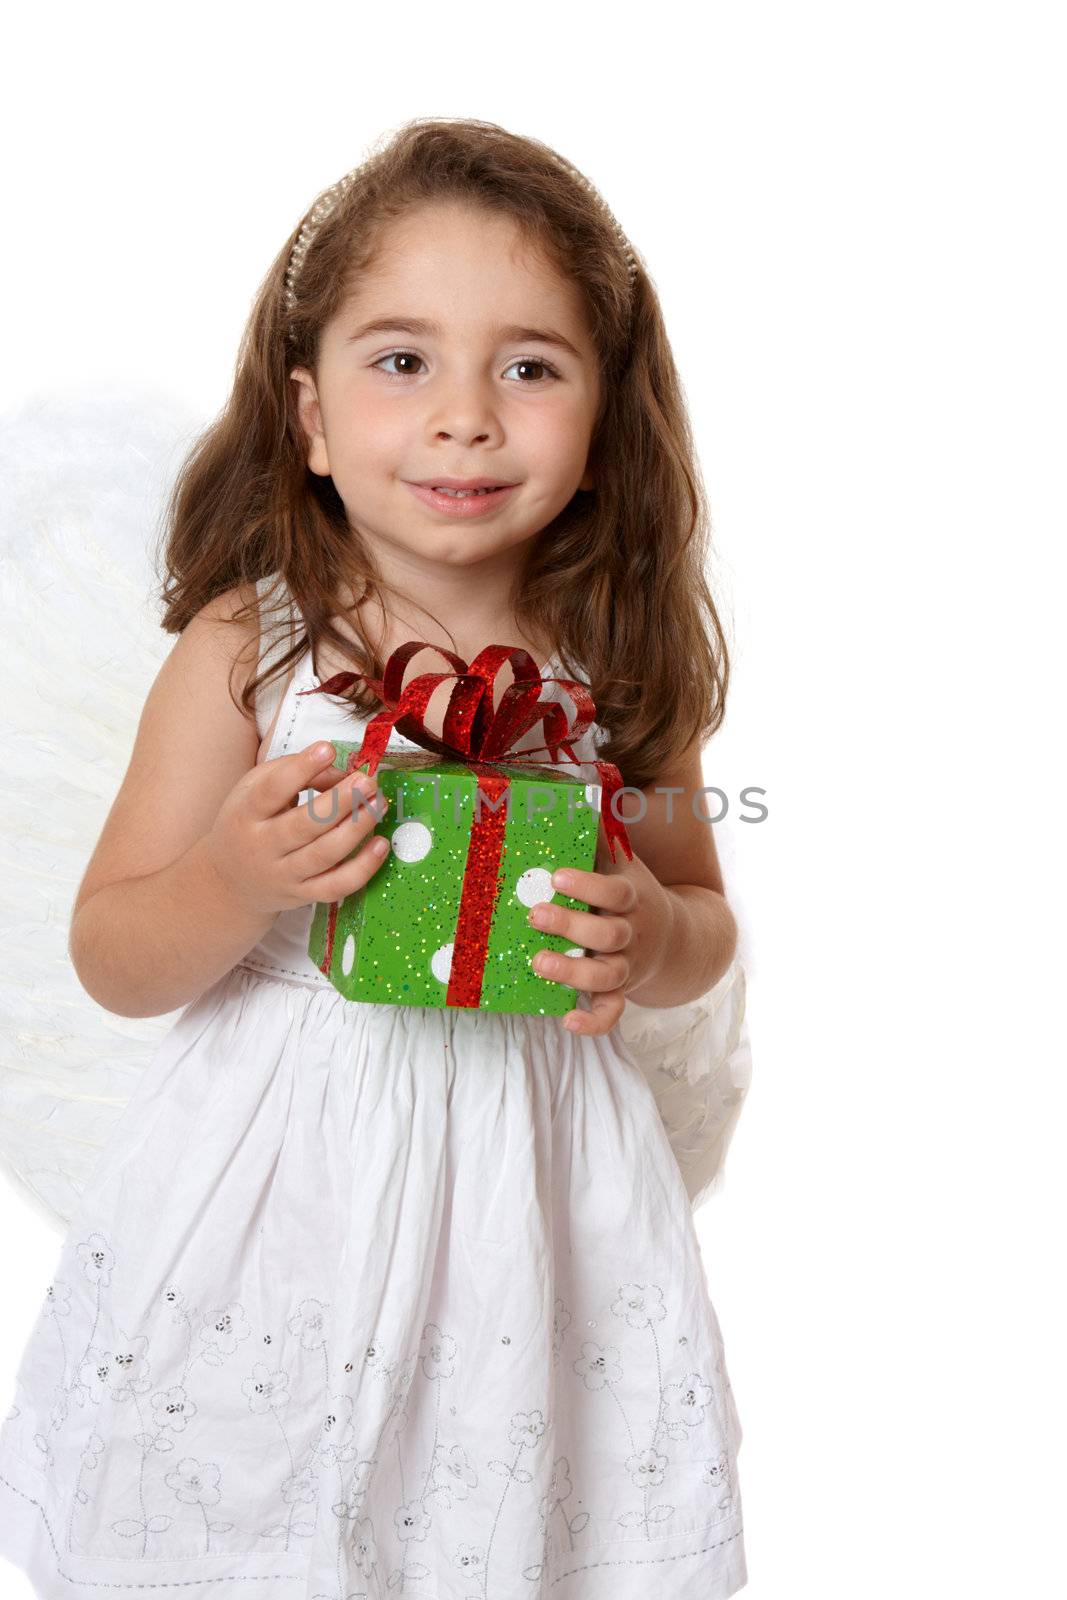 Beautiful little girl wearing a white dress and wings is holding a present.